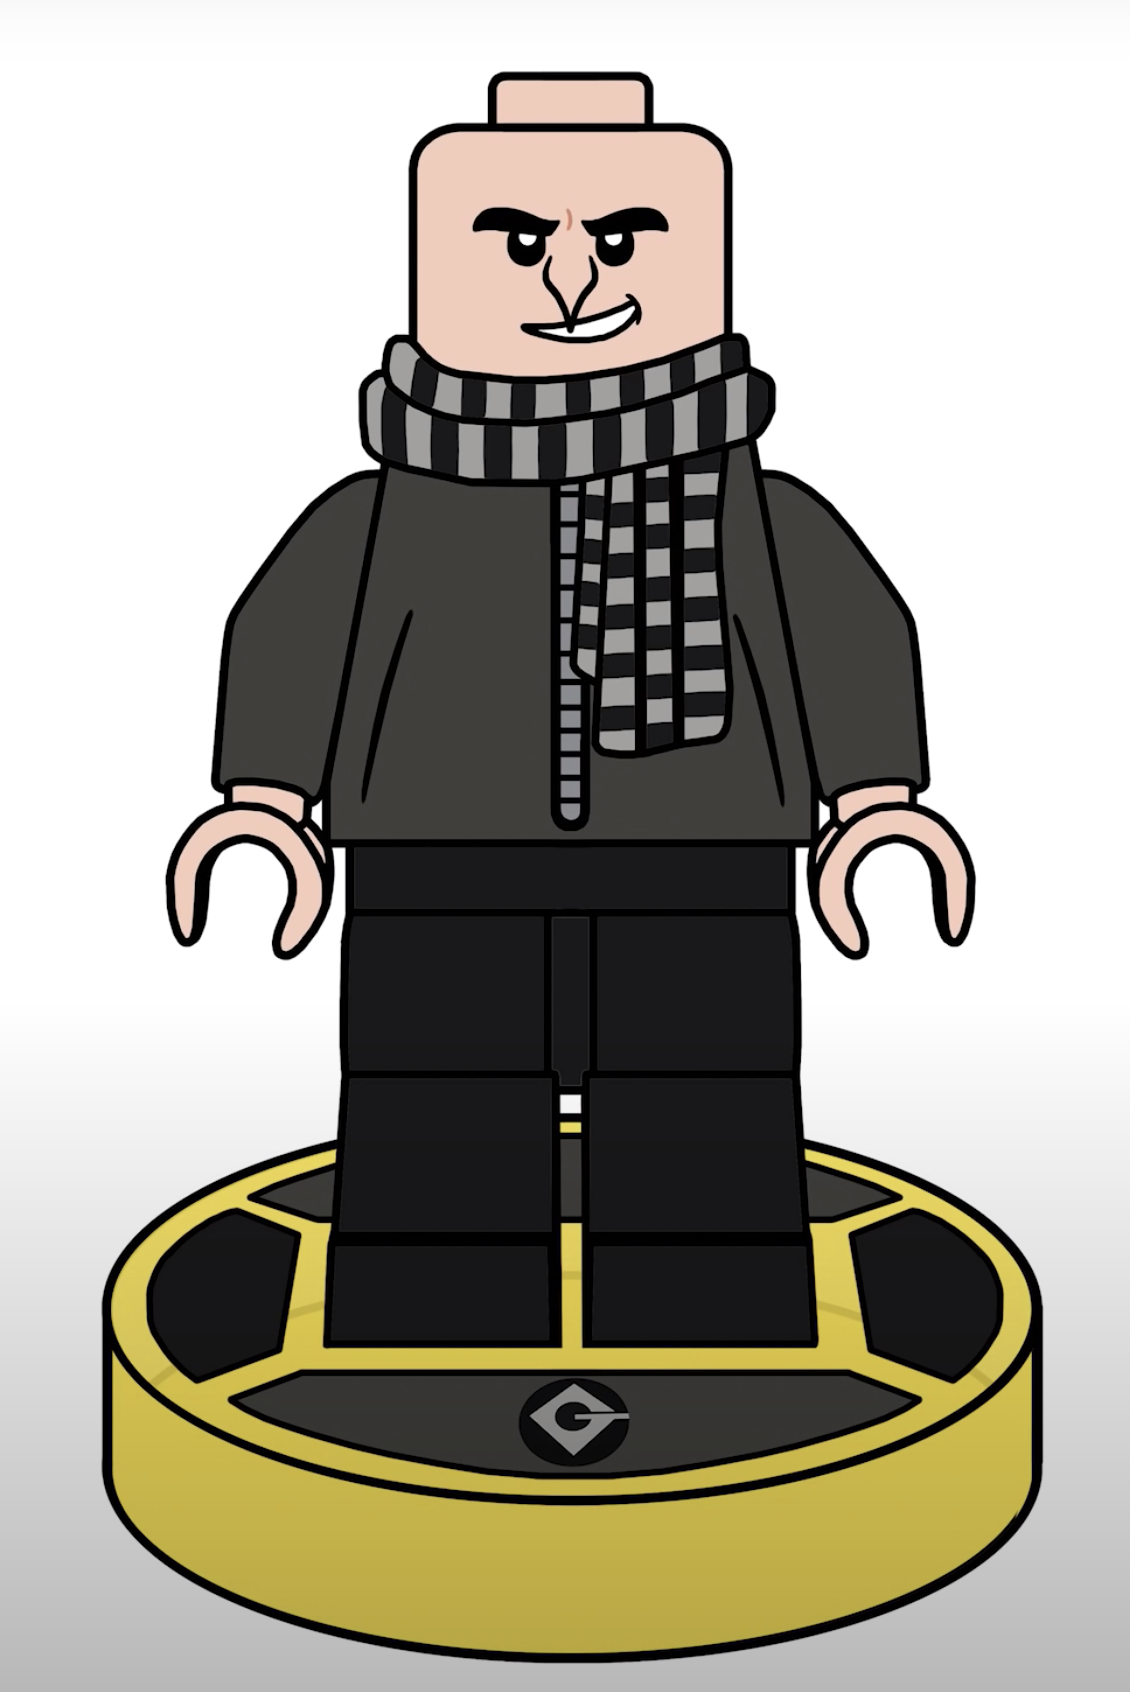 LEGO MOC Dr. Nefario Despicable Me by custominstructions